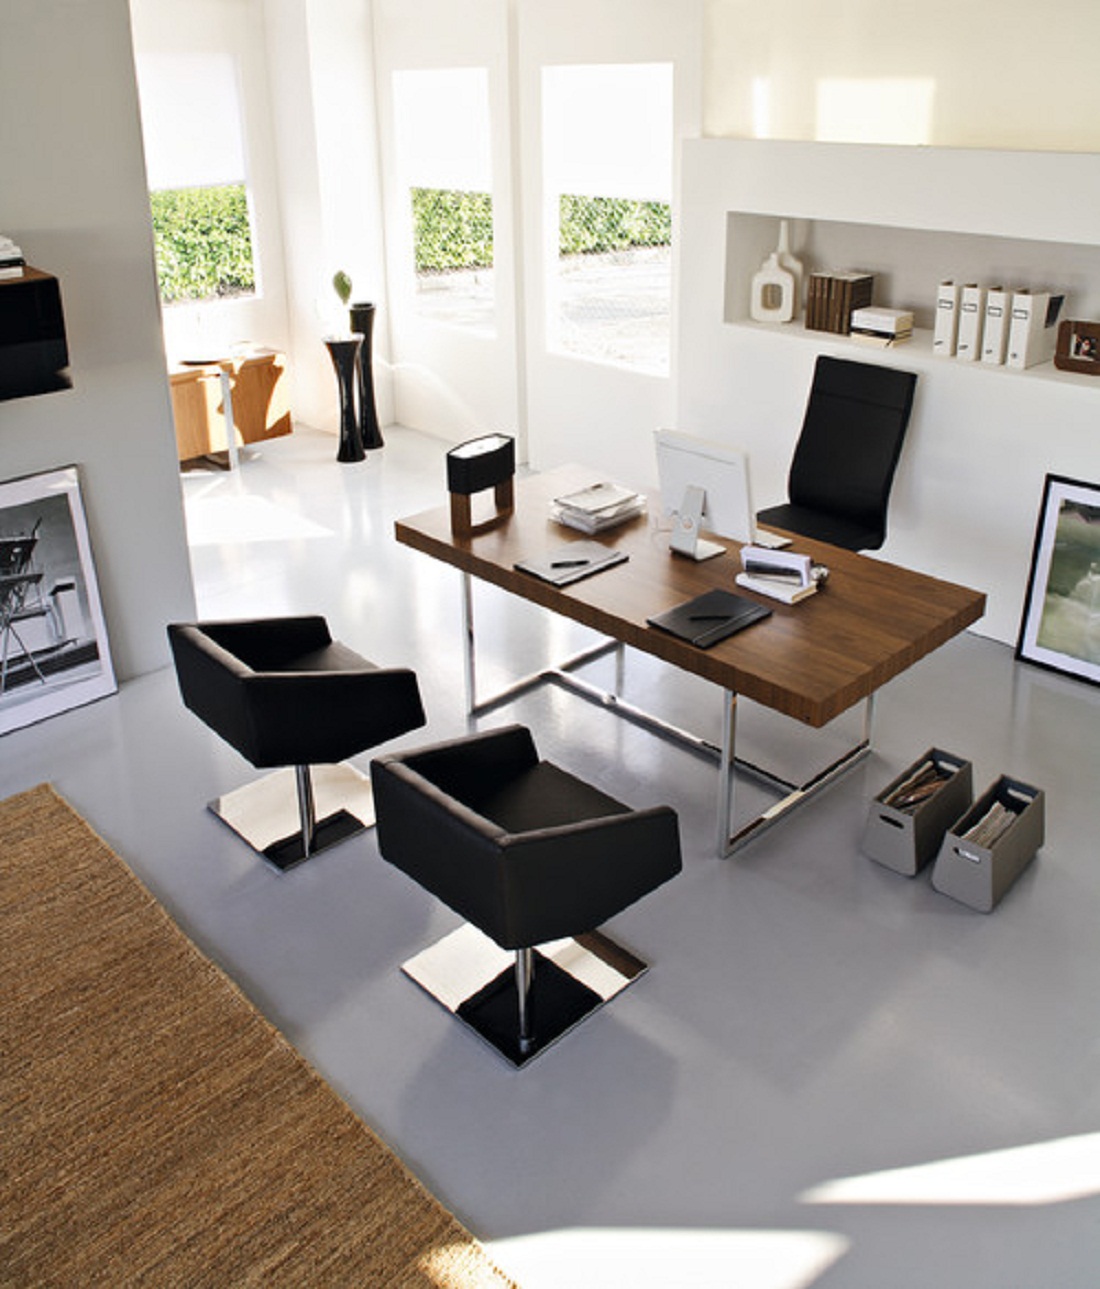 Assembling Furniture Home Neat Assembling Furniture In Modern Home Office Area Exposing Dark Chairs And Teak Desk Office Modern Home Office To Play With Furniture And Lighting Fixtures